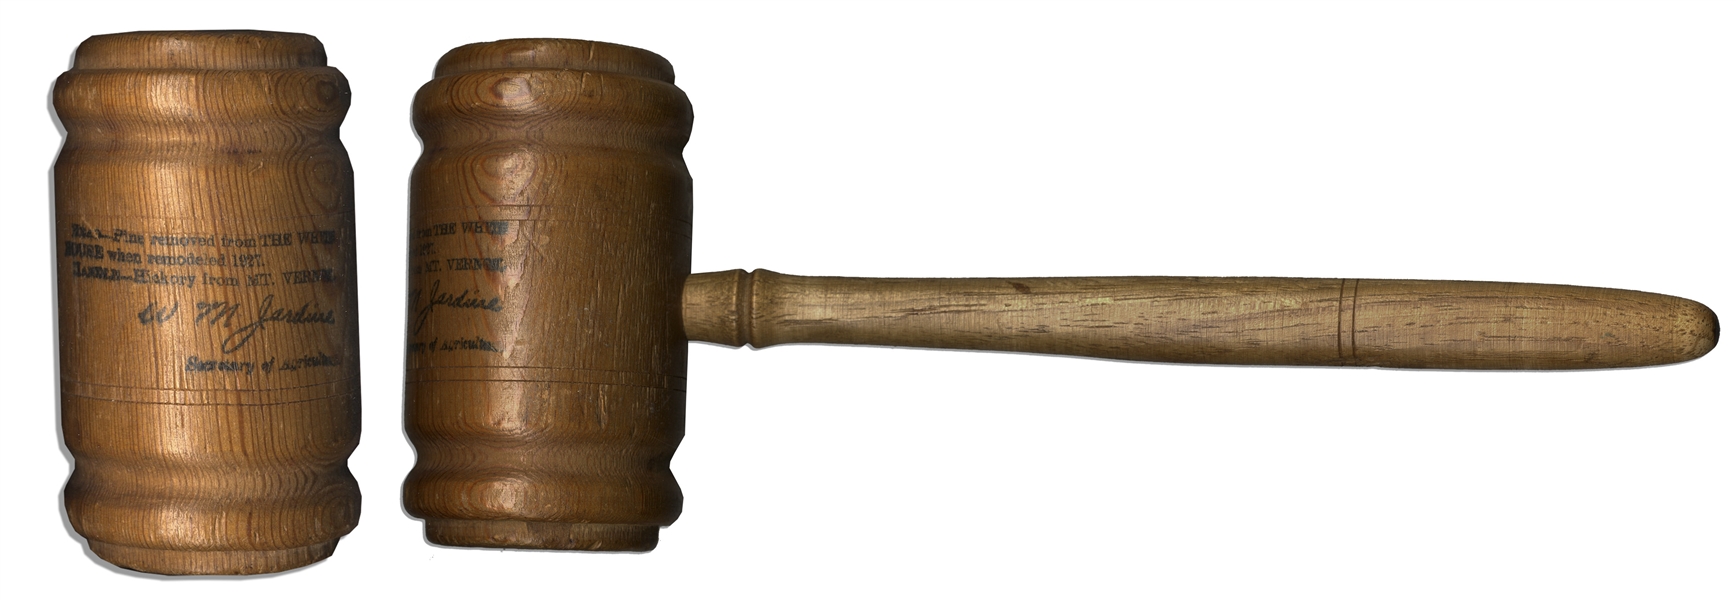 Presentation Gavel Made of Pine Wood From the White House & Hickory From Mount Vernon -- Circa 1928